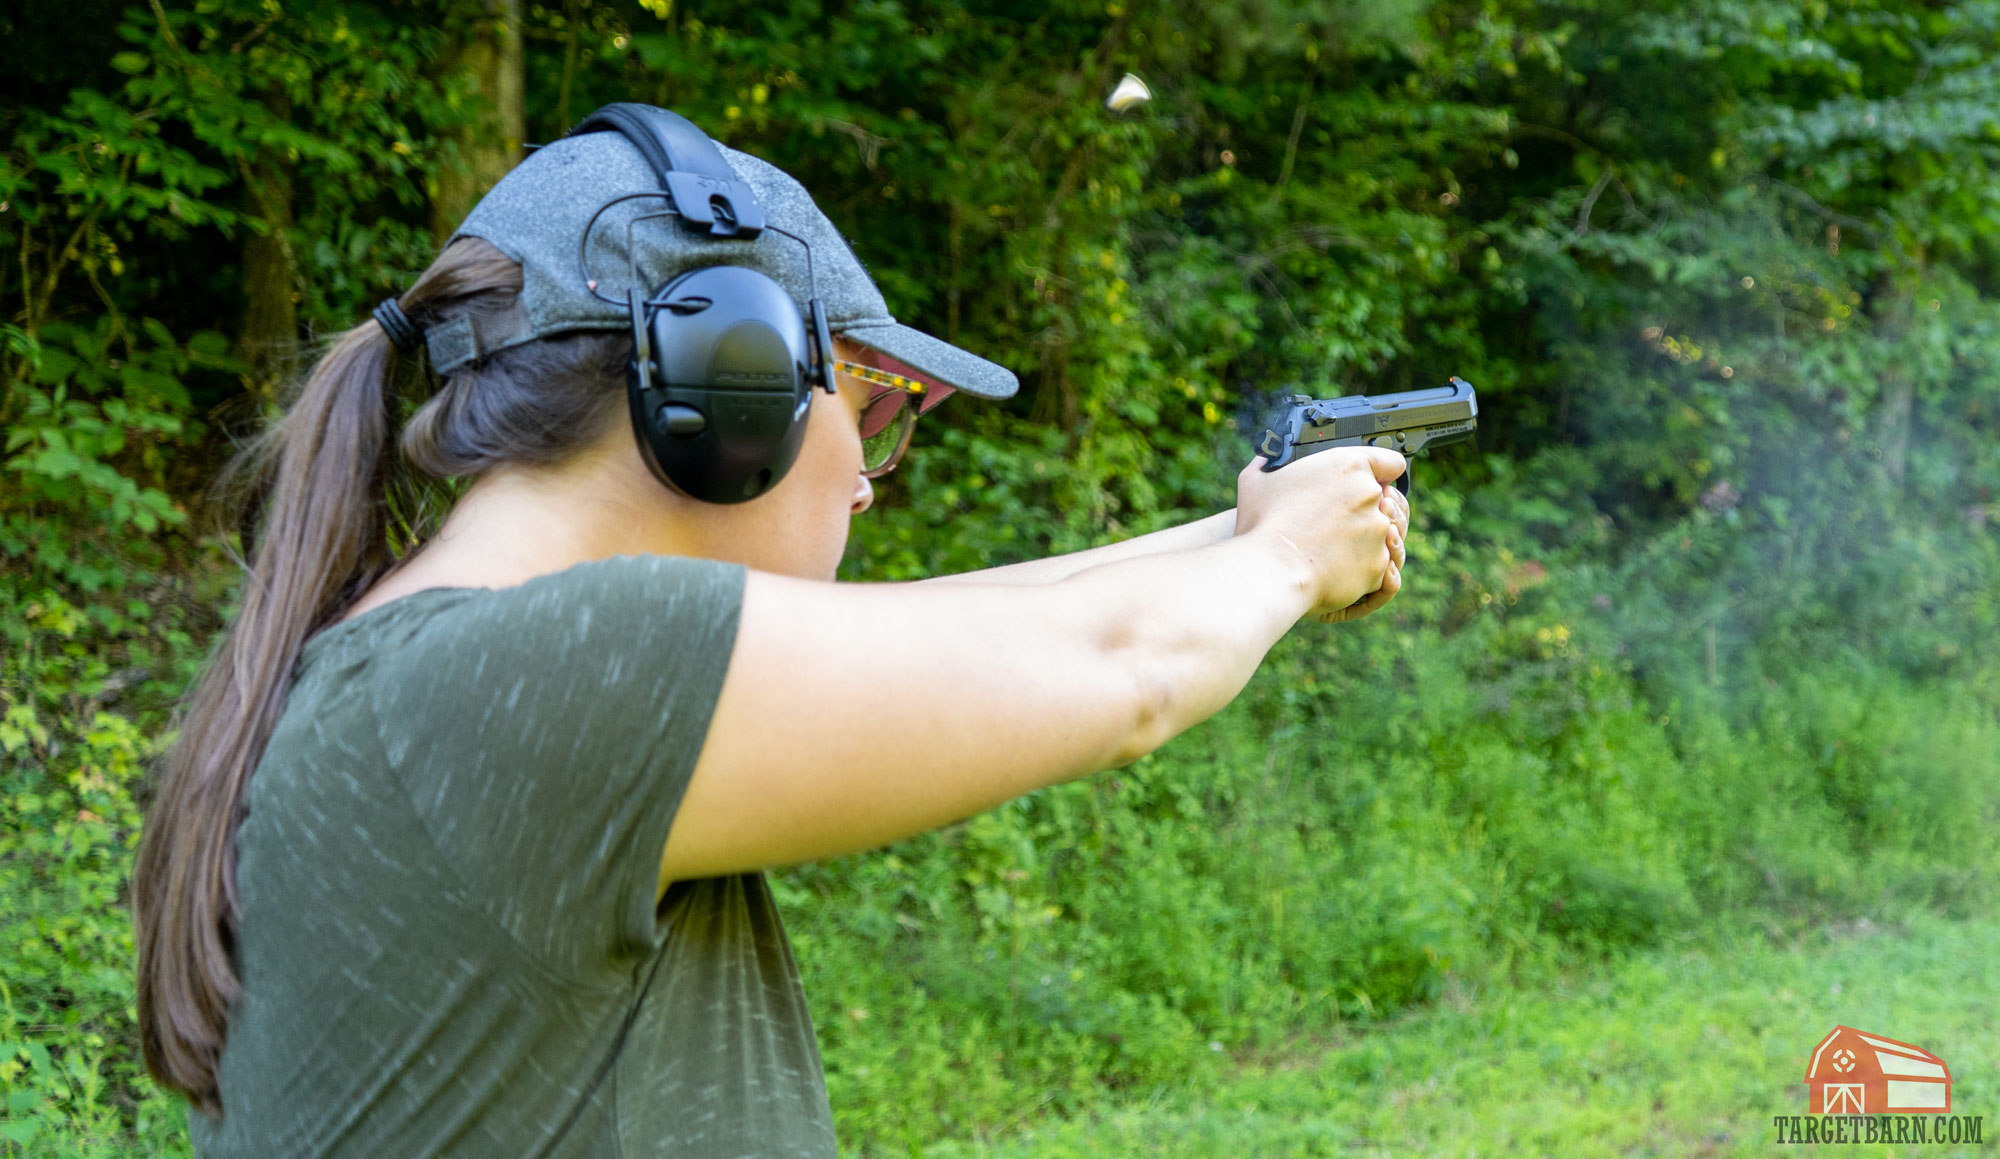 the author shooting a 9mm pistol with recoil